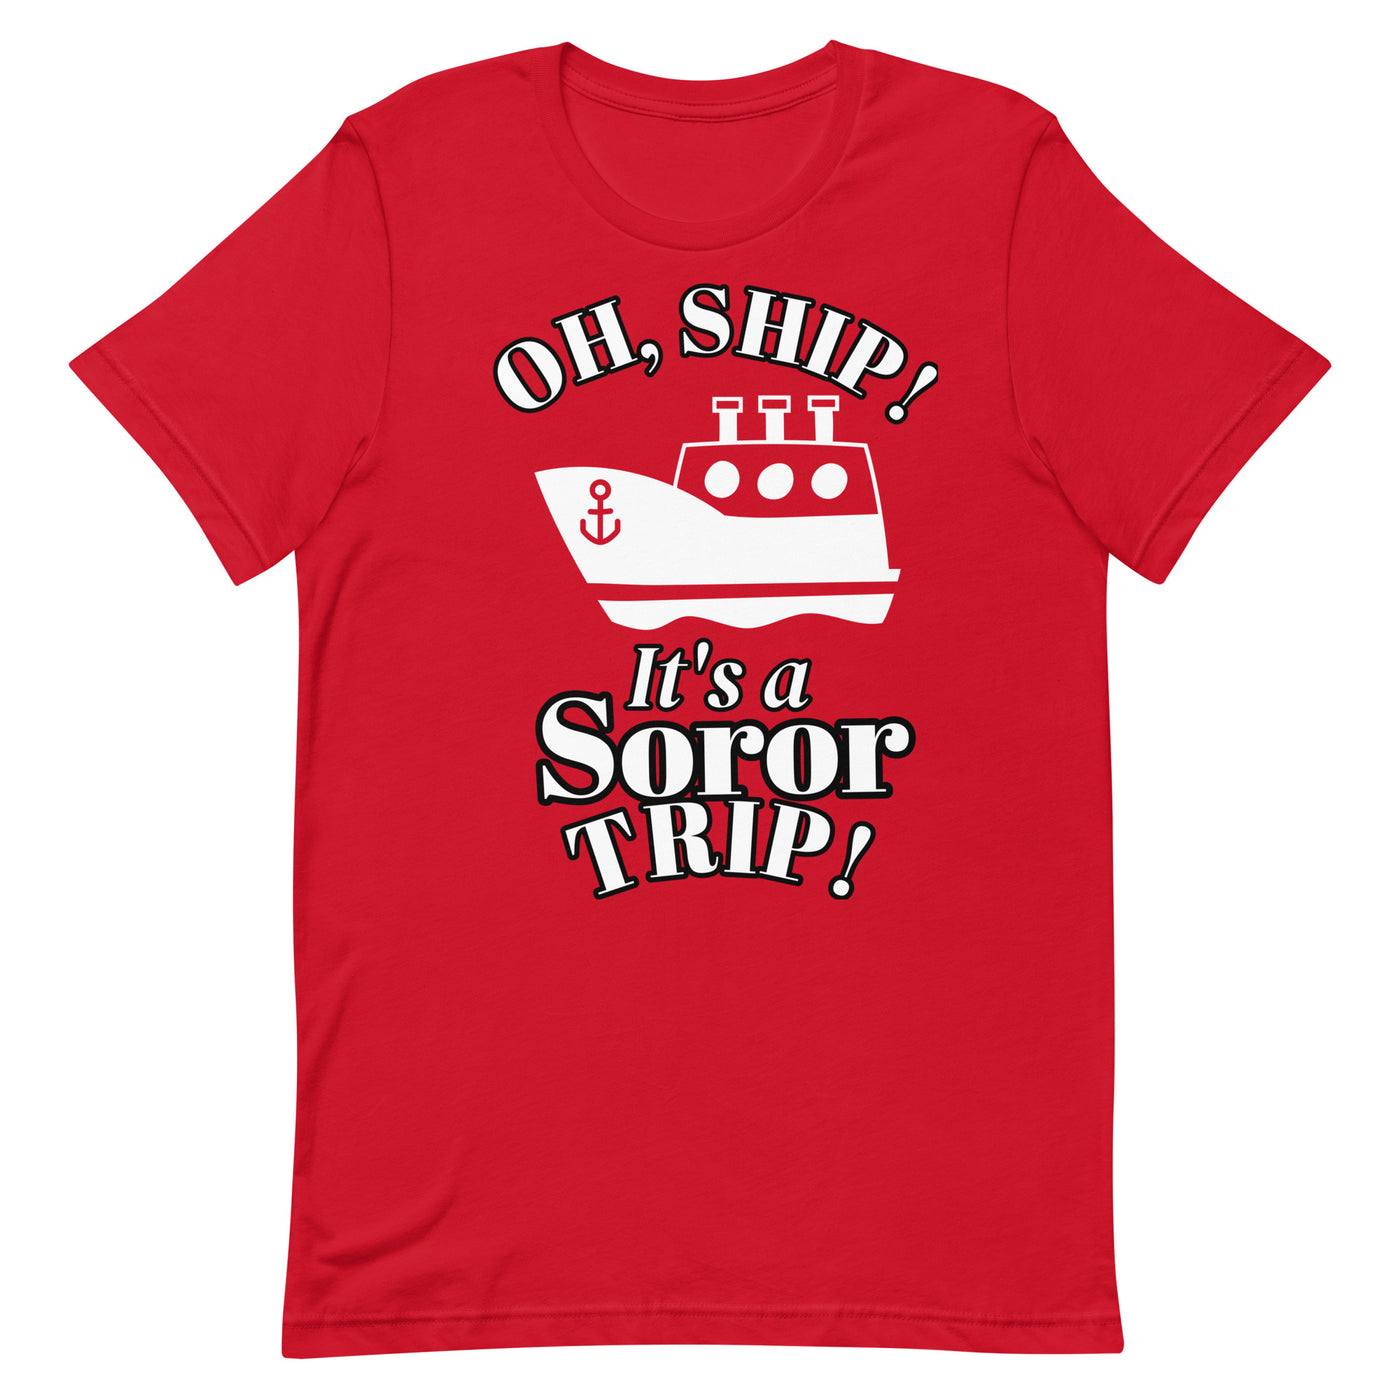 Oh Ship! Red & White